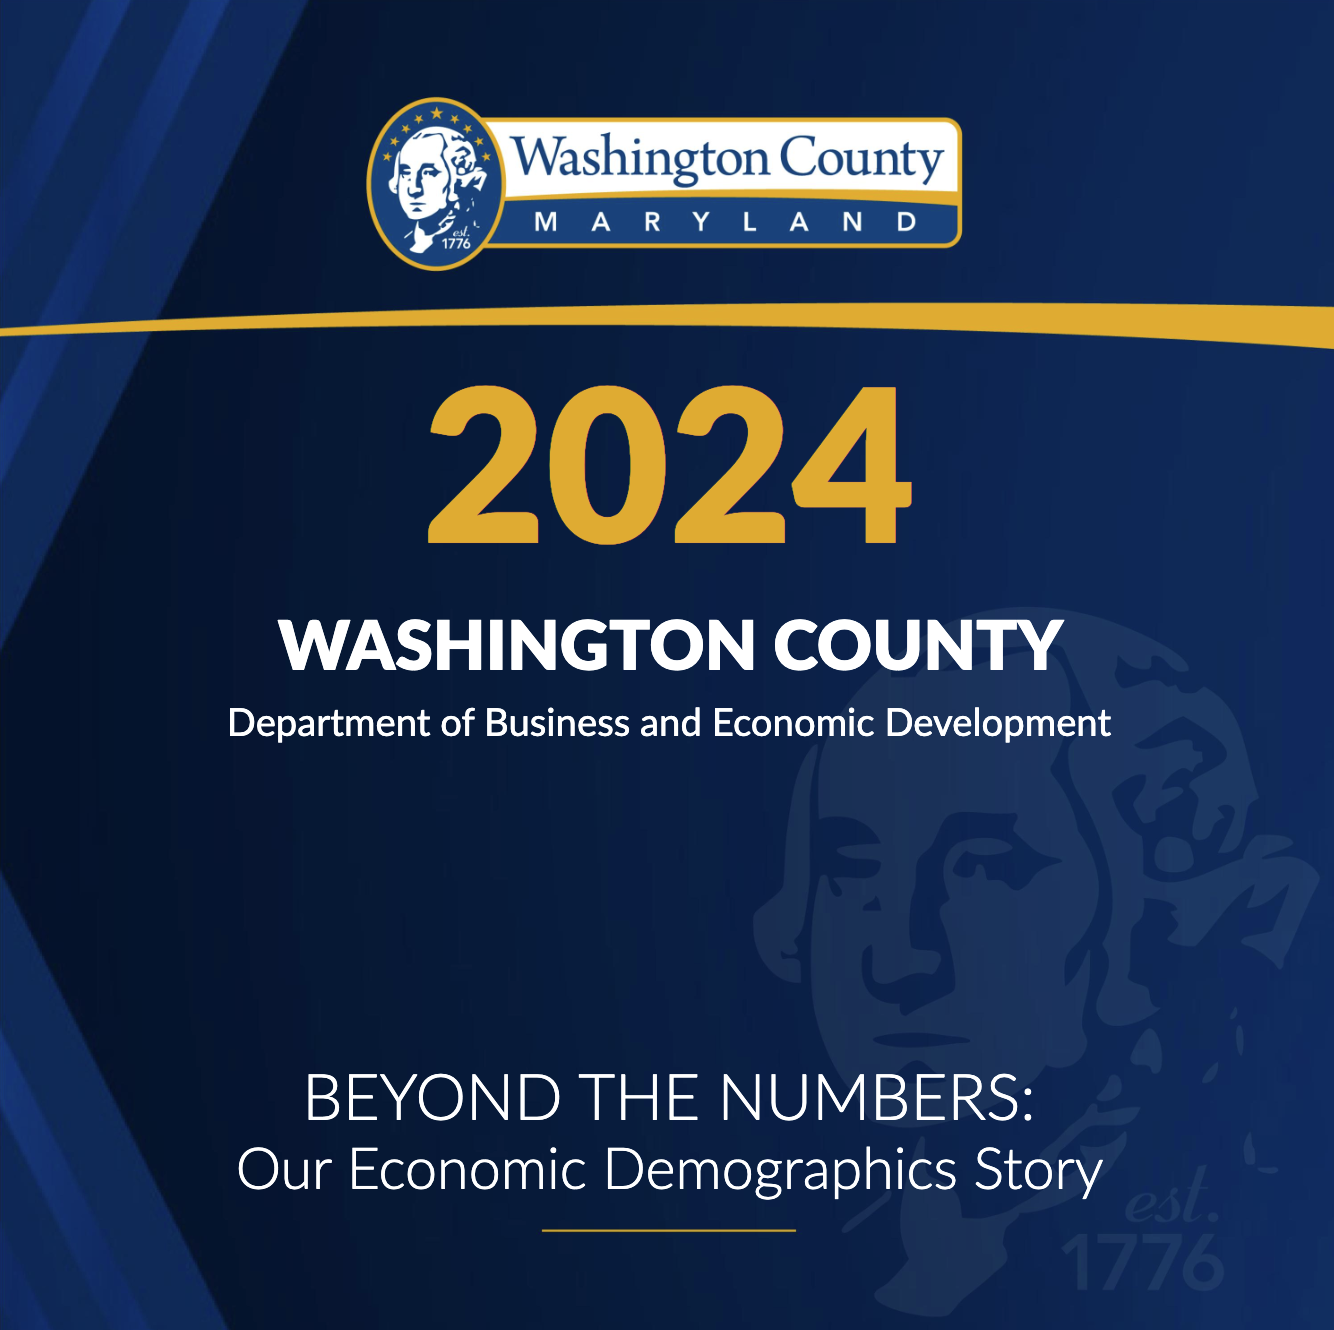 Discover the Economic Advantages of Washington County with New Publication, ‘Beyond The Numbers’